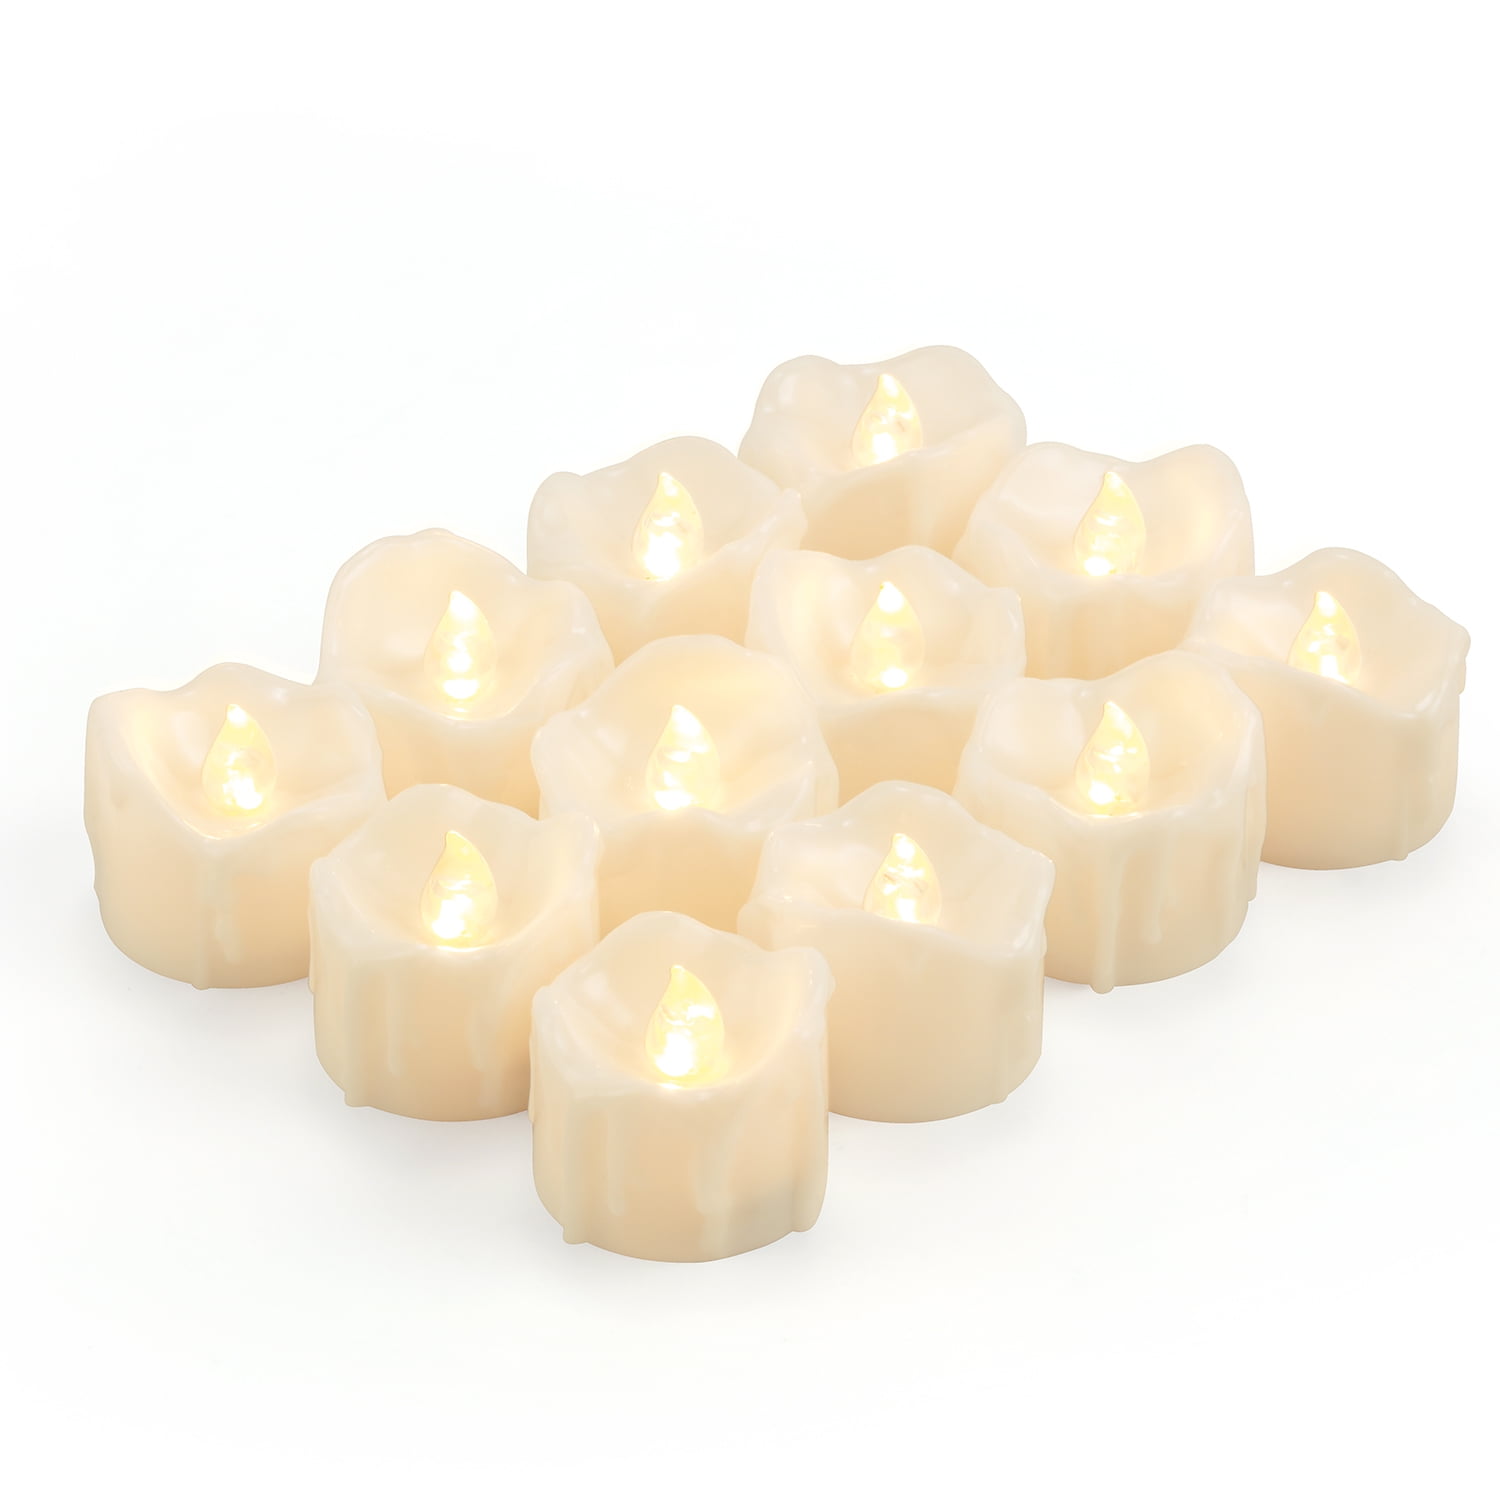 Warm White 24Pcs Flameless Flickering LED Candles Tea Light Battery Operated 